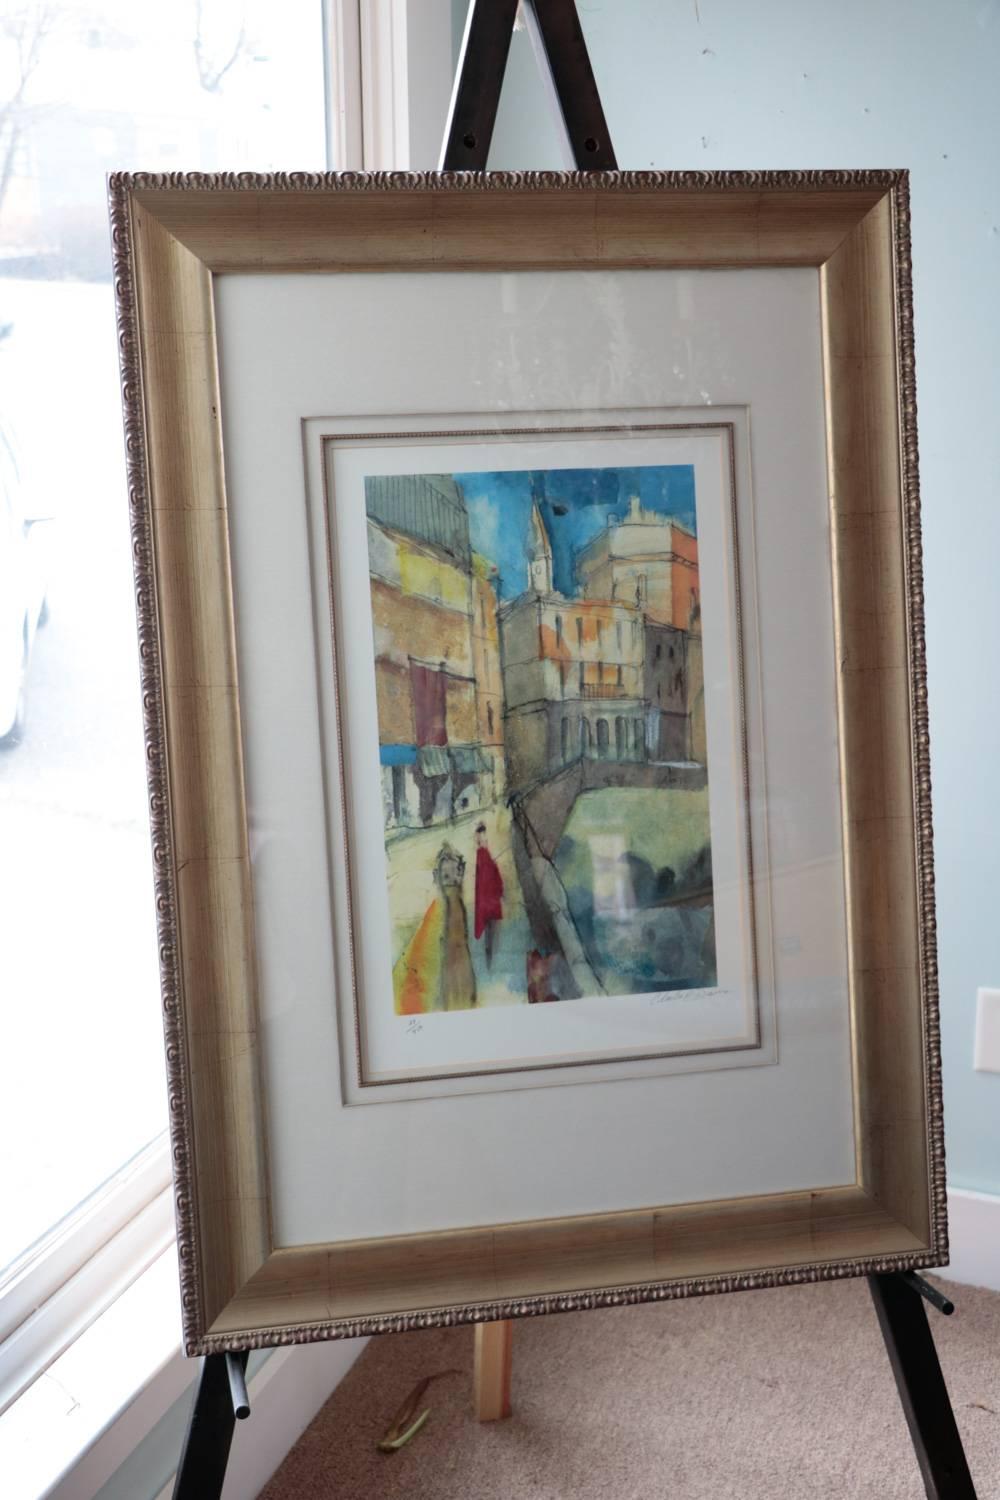 A signed pair of Charles R Davies colorful scenes Art Window Looks and Inkempen. A pencil signed limited edition giclee of a watercolor painting. One is titled Window Looks the other In Kempen. InKempen is numbered 24/450 in pencil. Window looks is